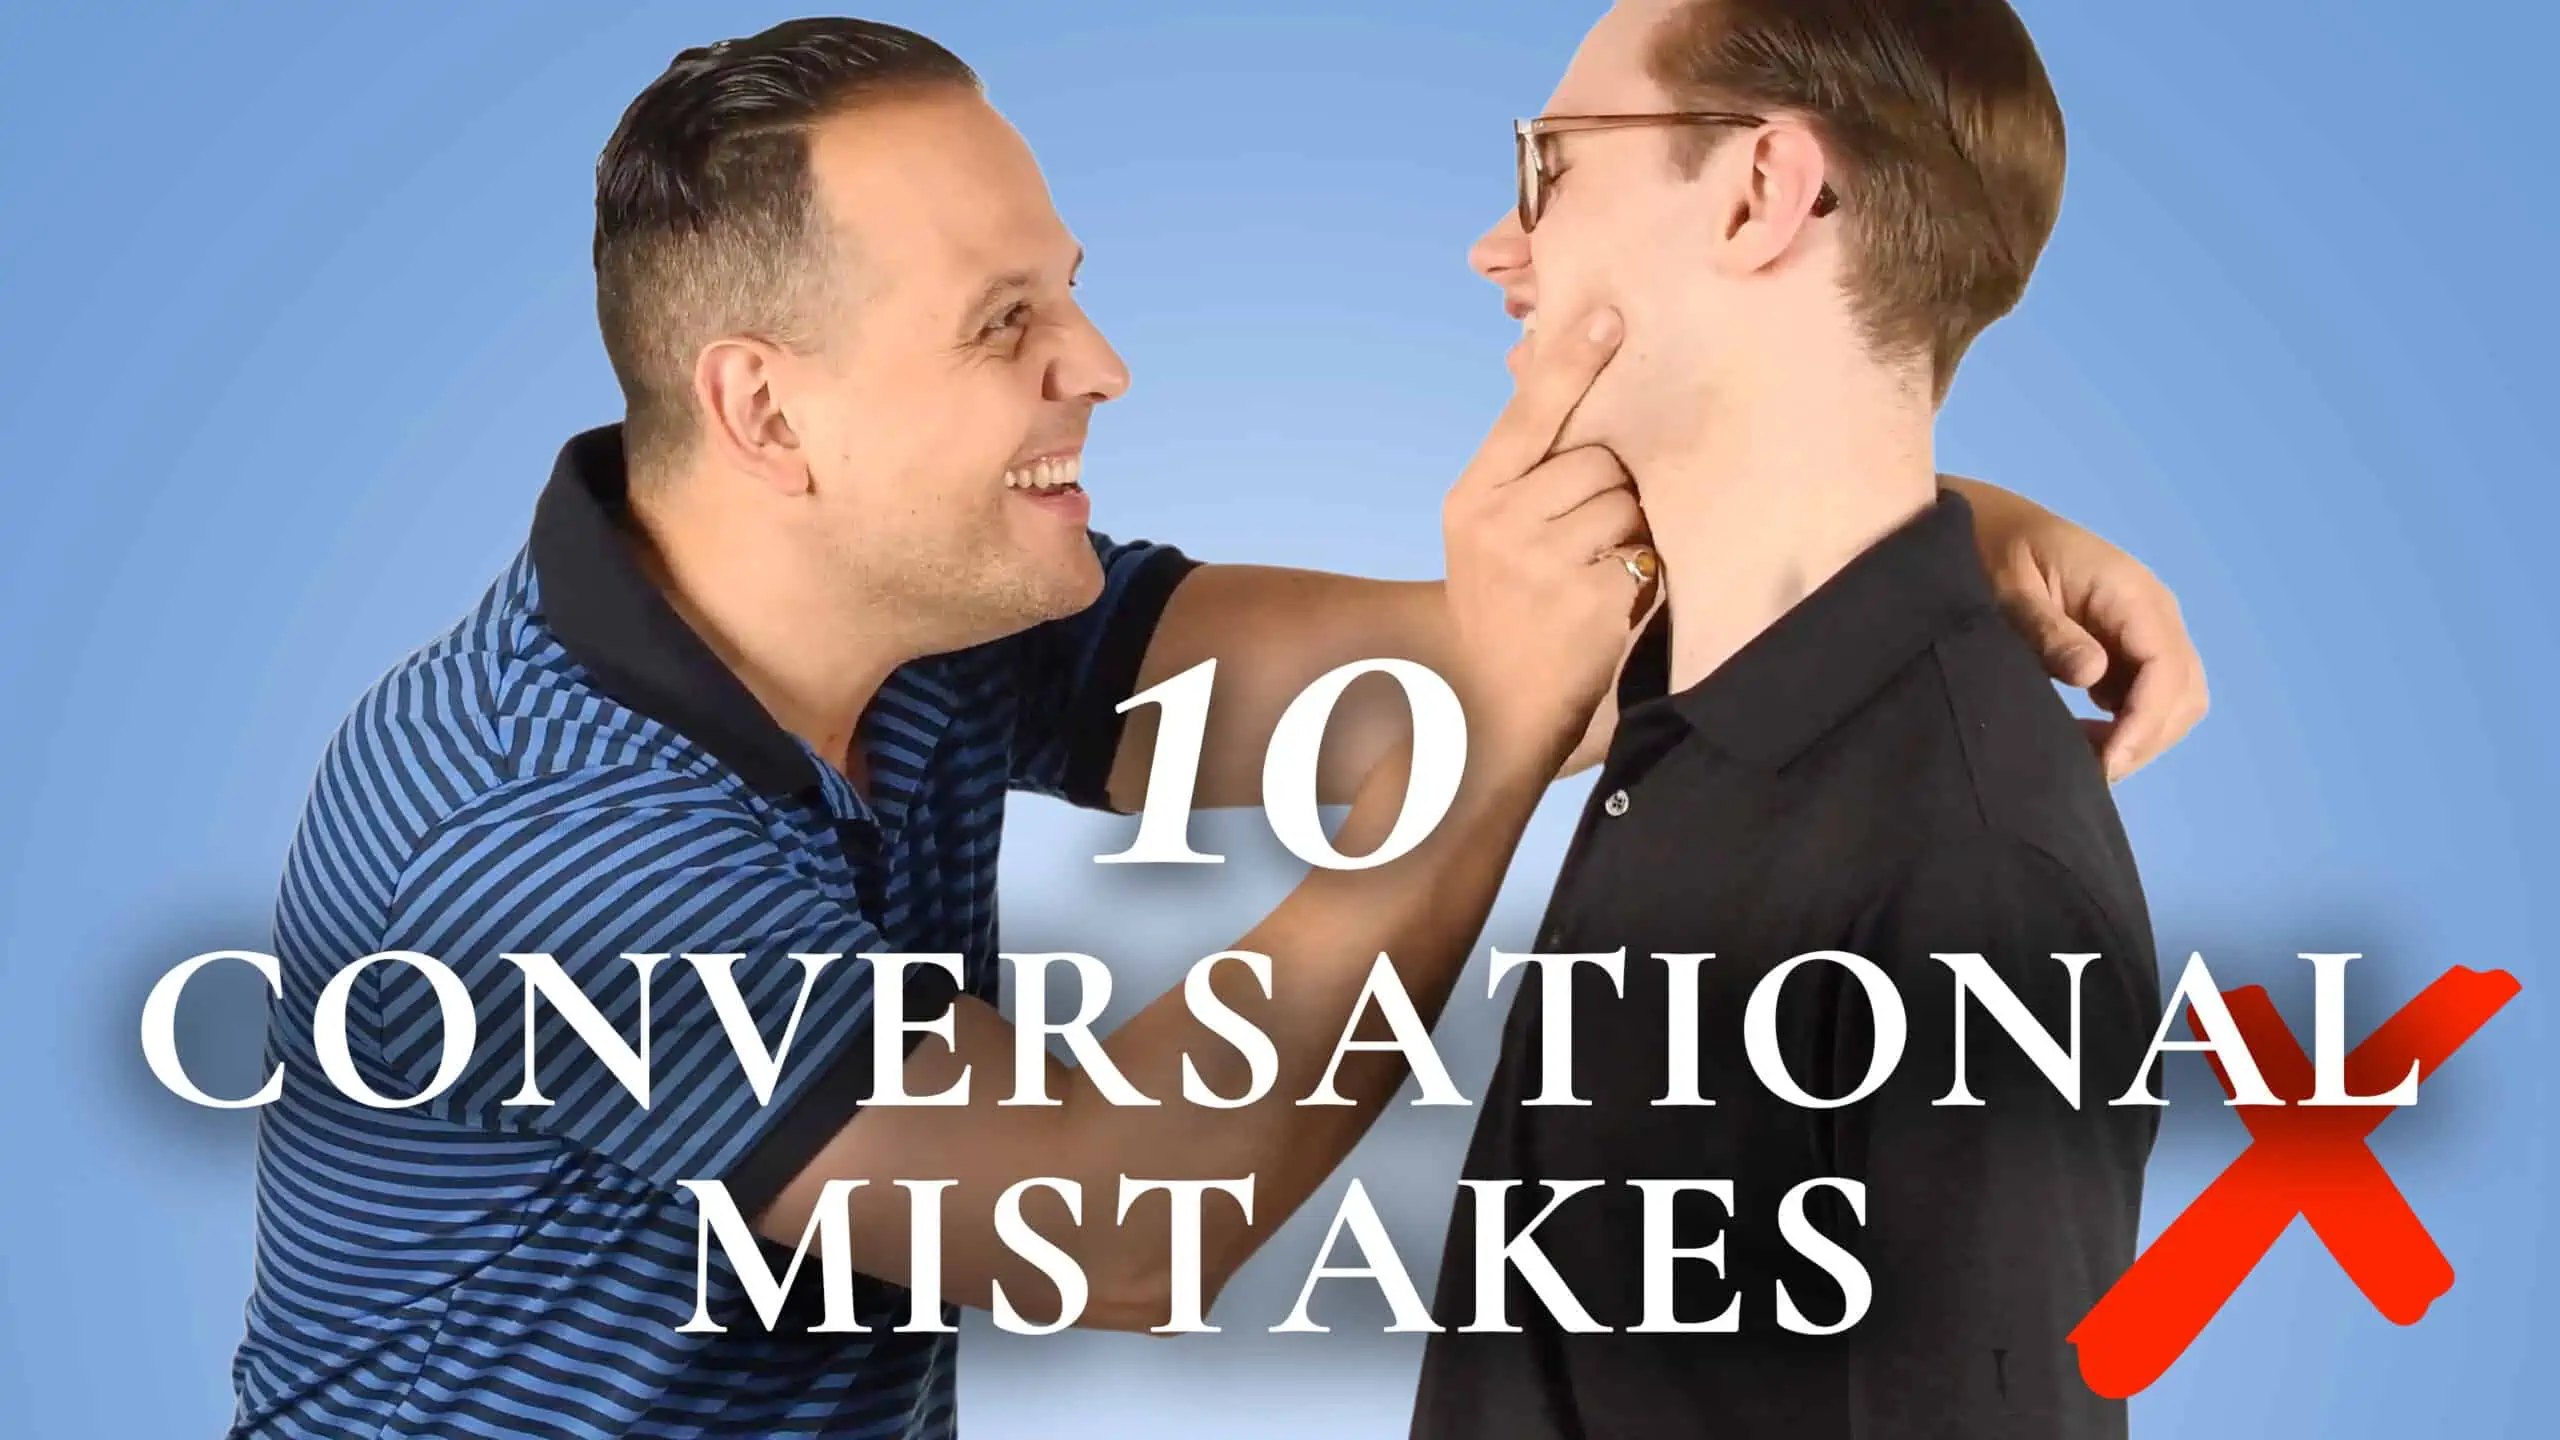 10 conversational mistakes 3840x2160 wp scaled